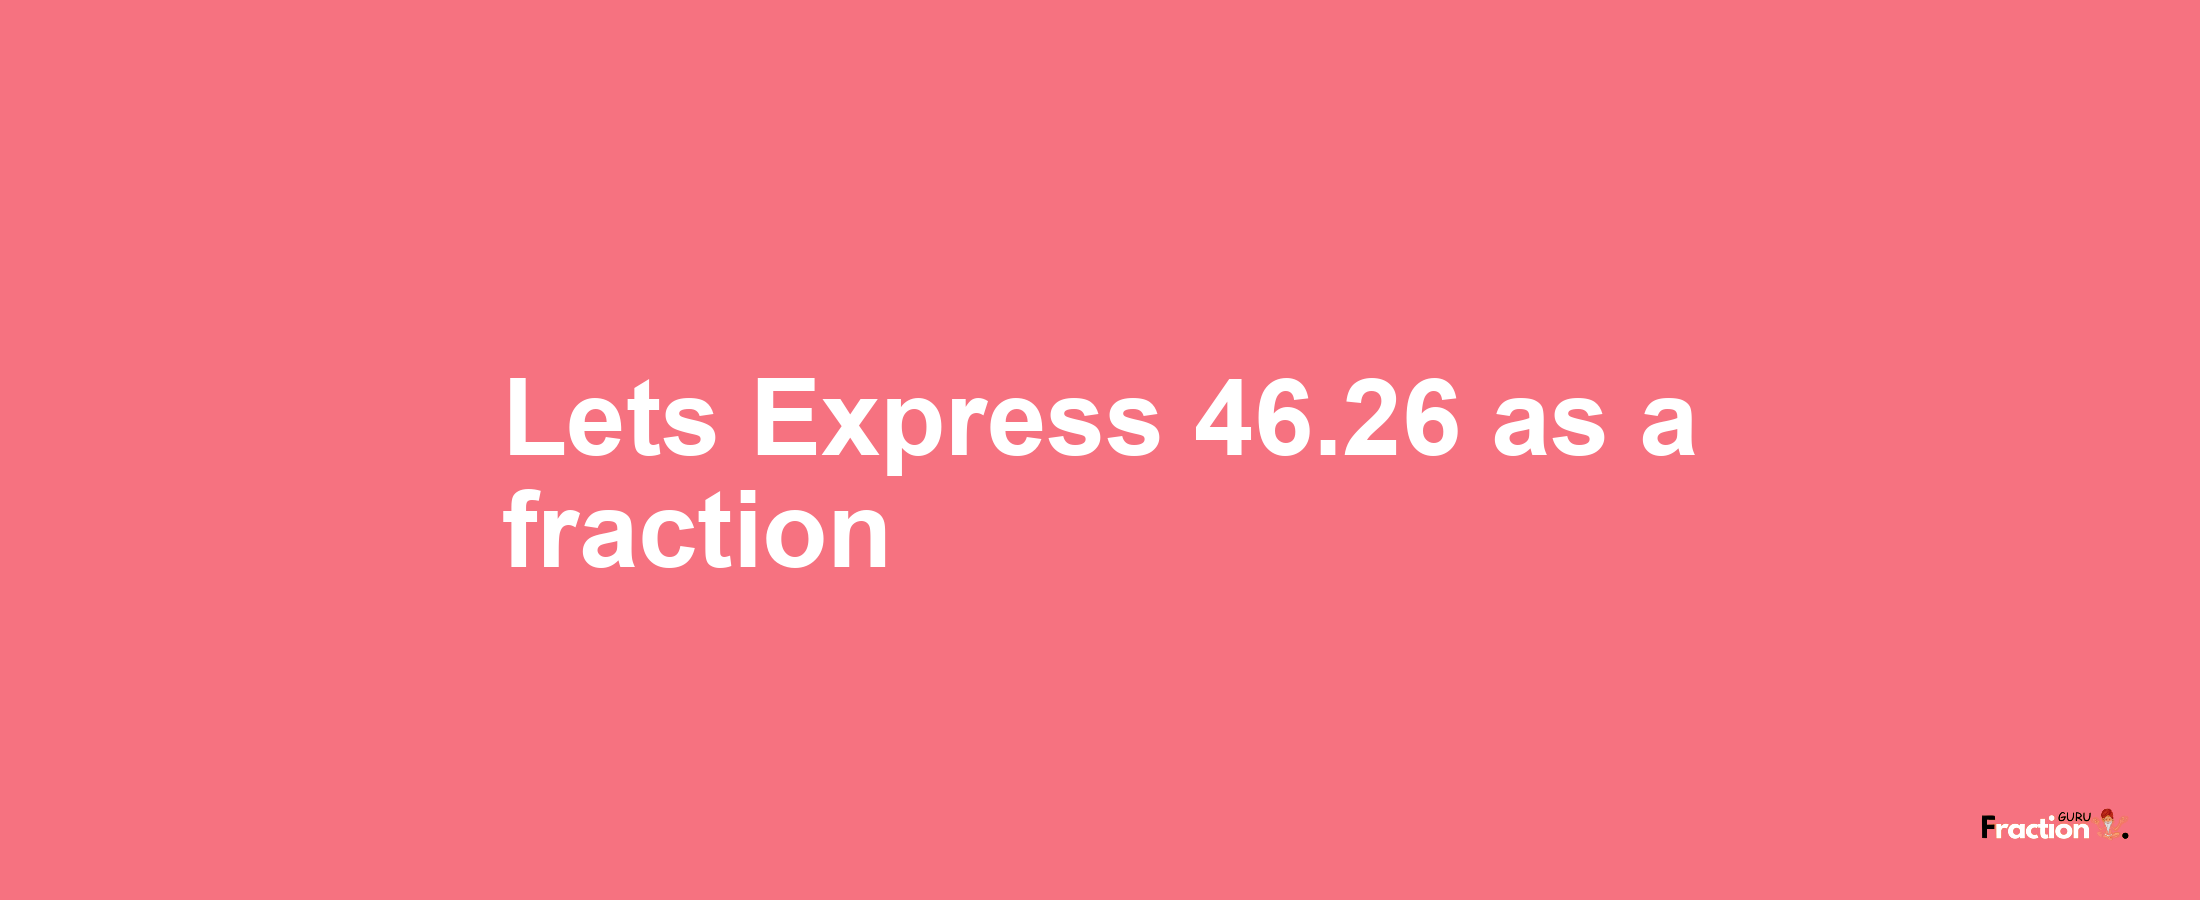 Lets Express 46.26 as afraction